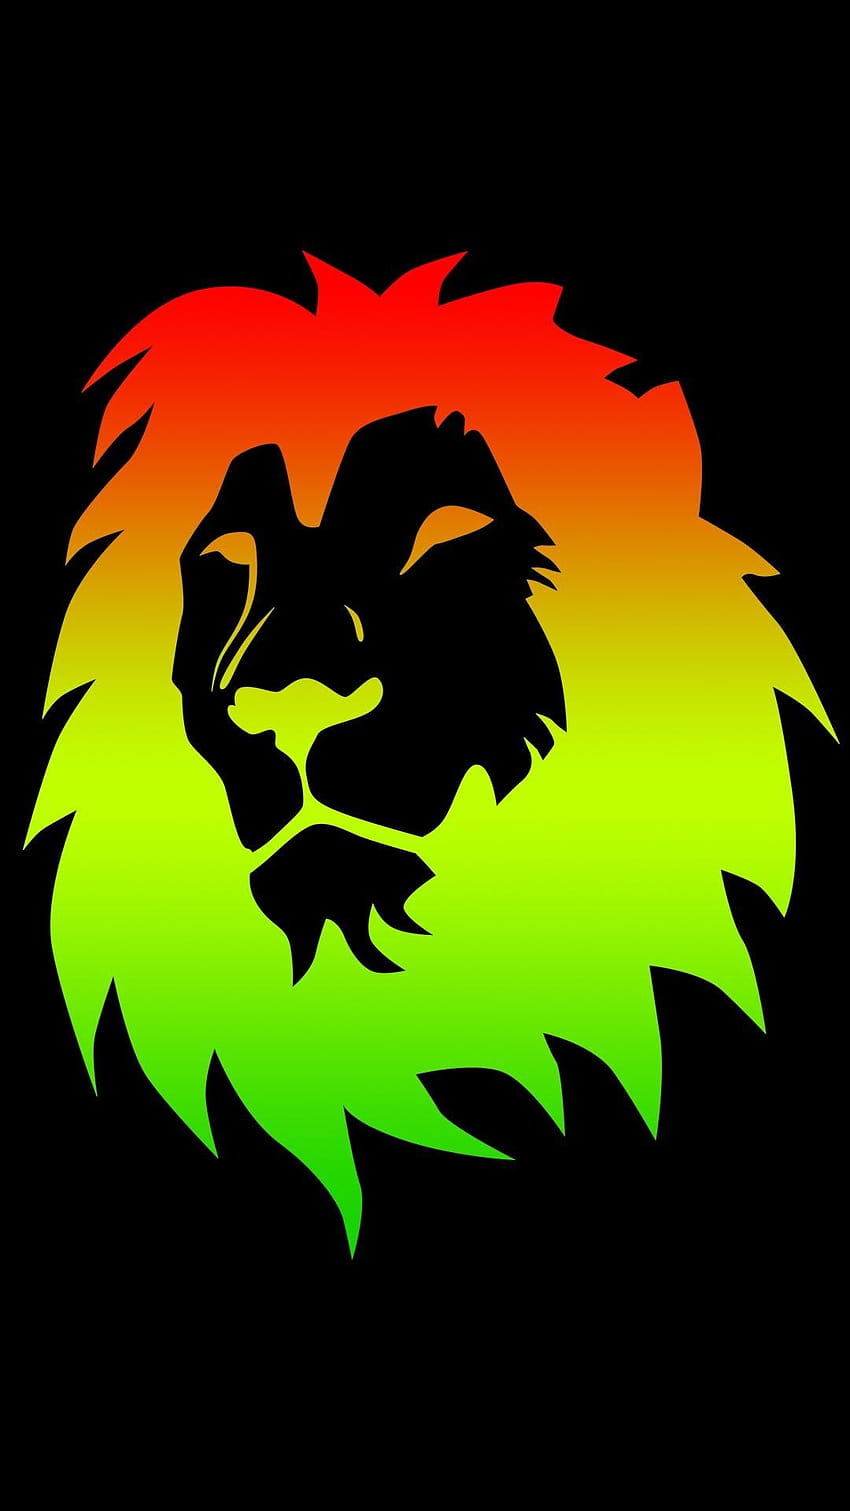 lion with dreads wallpaper